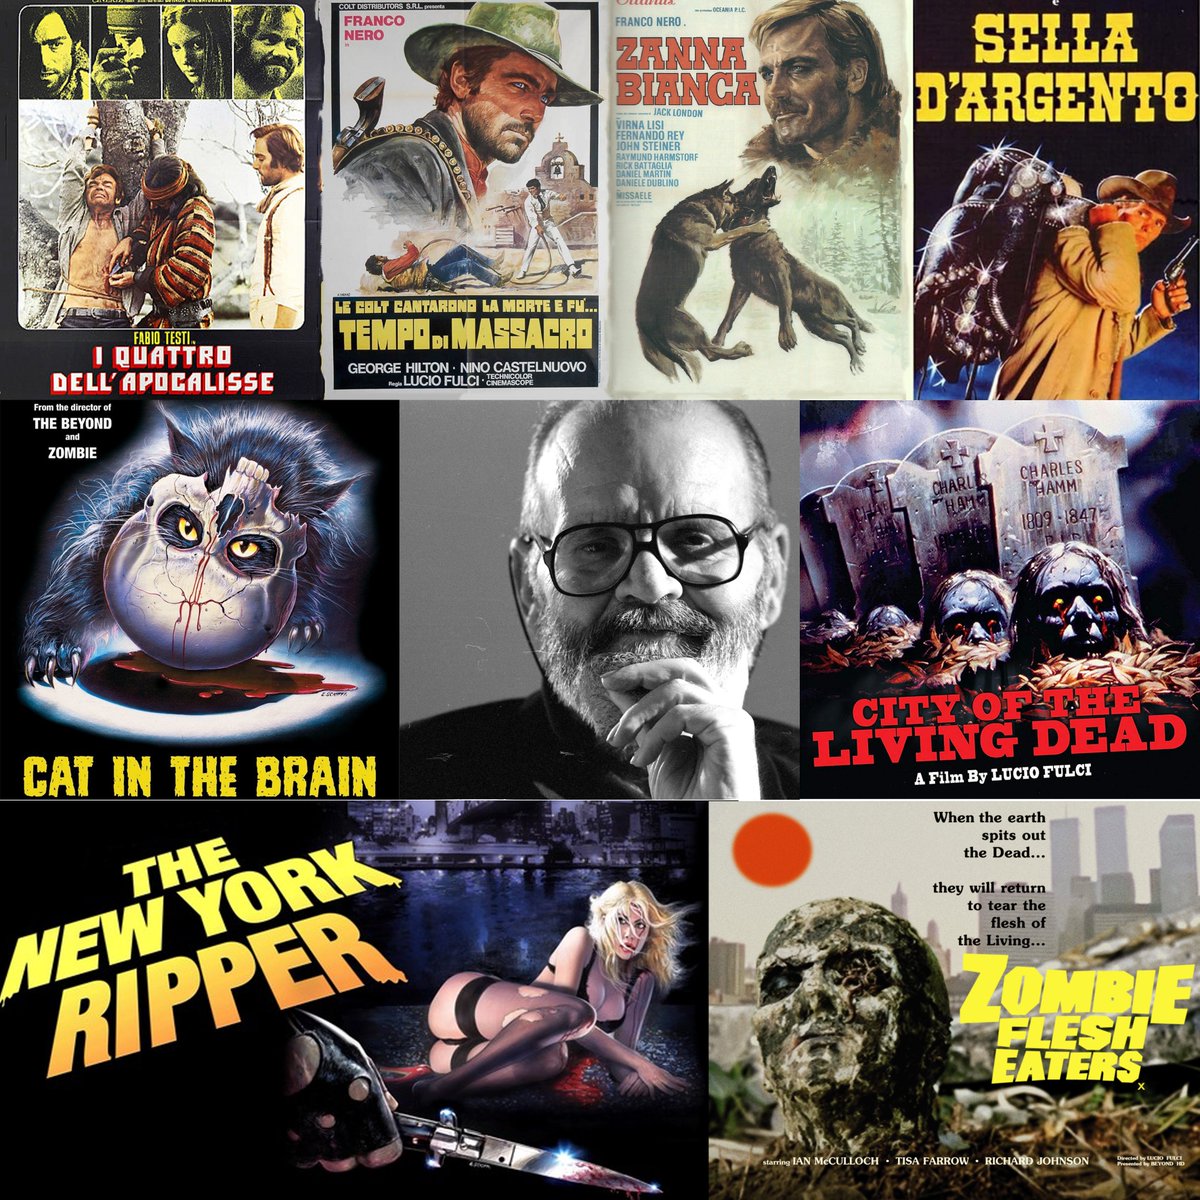 Remembering Italian actor, screenwriter & director Lucio Fulci who passed away on this day 1996

Rest in Peace

#luciofulci #filmmaker #italian